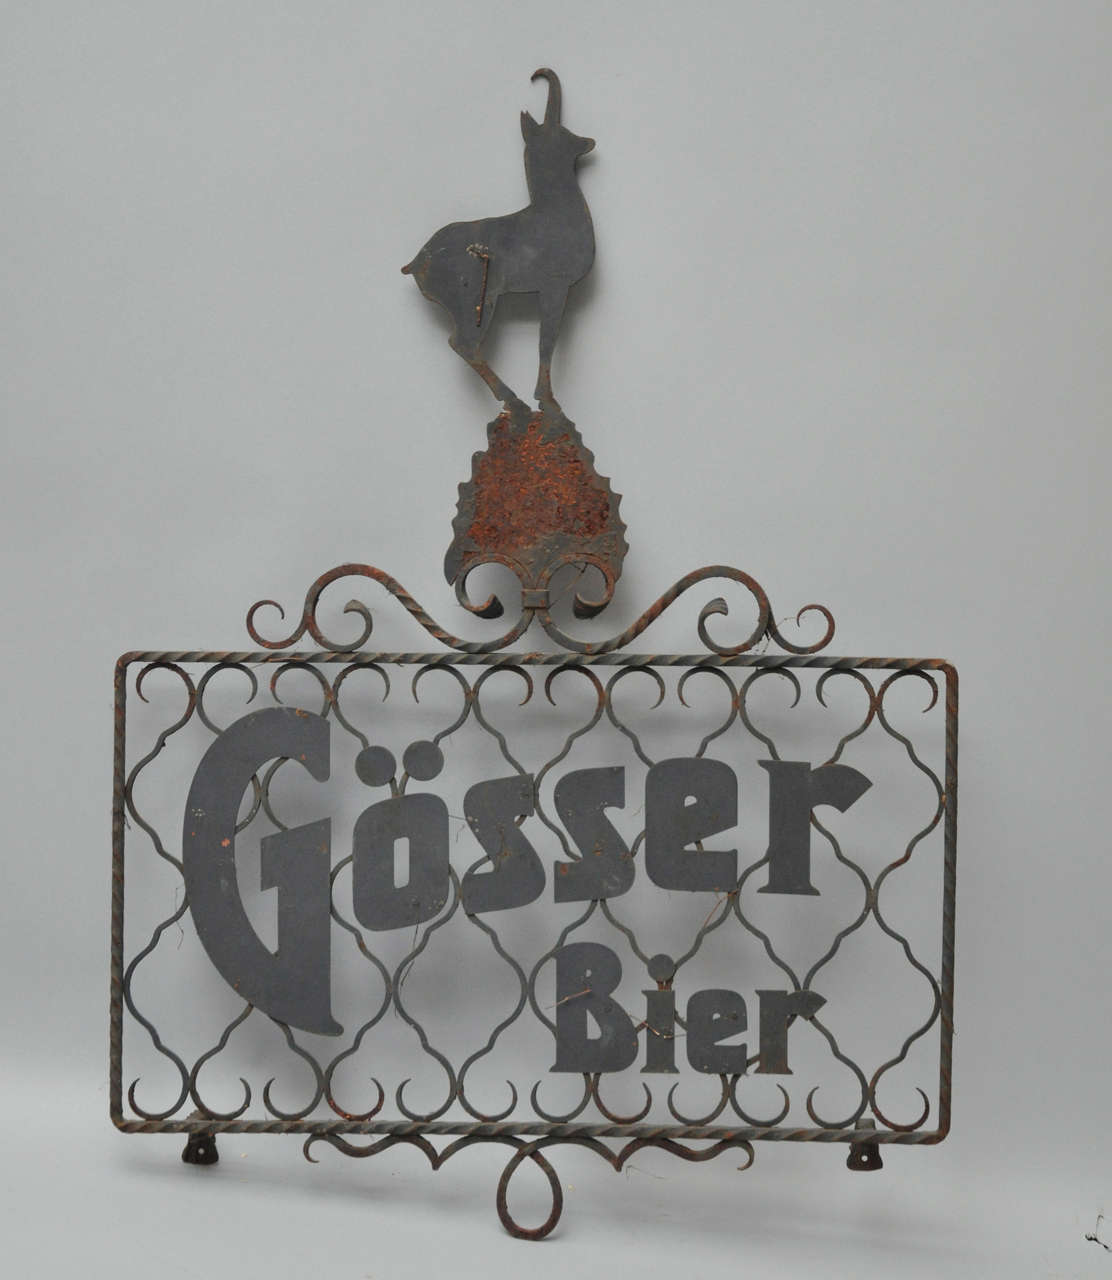 Austrian wrought iron Gösser beer sign from the turn of the 20th century. Rectangular shaped frame with Gösser Bier logo amidst scrolled background, surmounted by a graceful stylized stag ornament. Gösser Bier is not only one of the best brands of